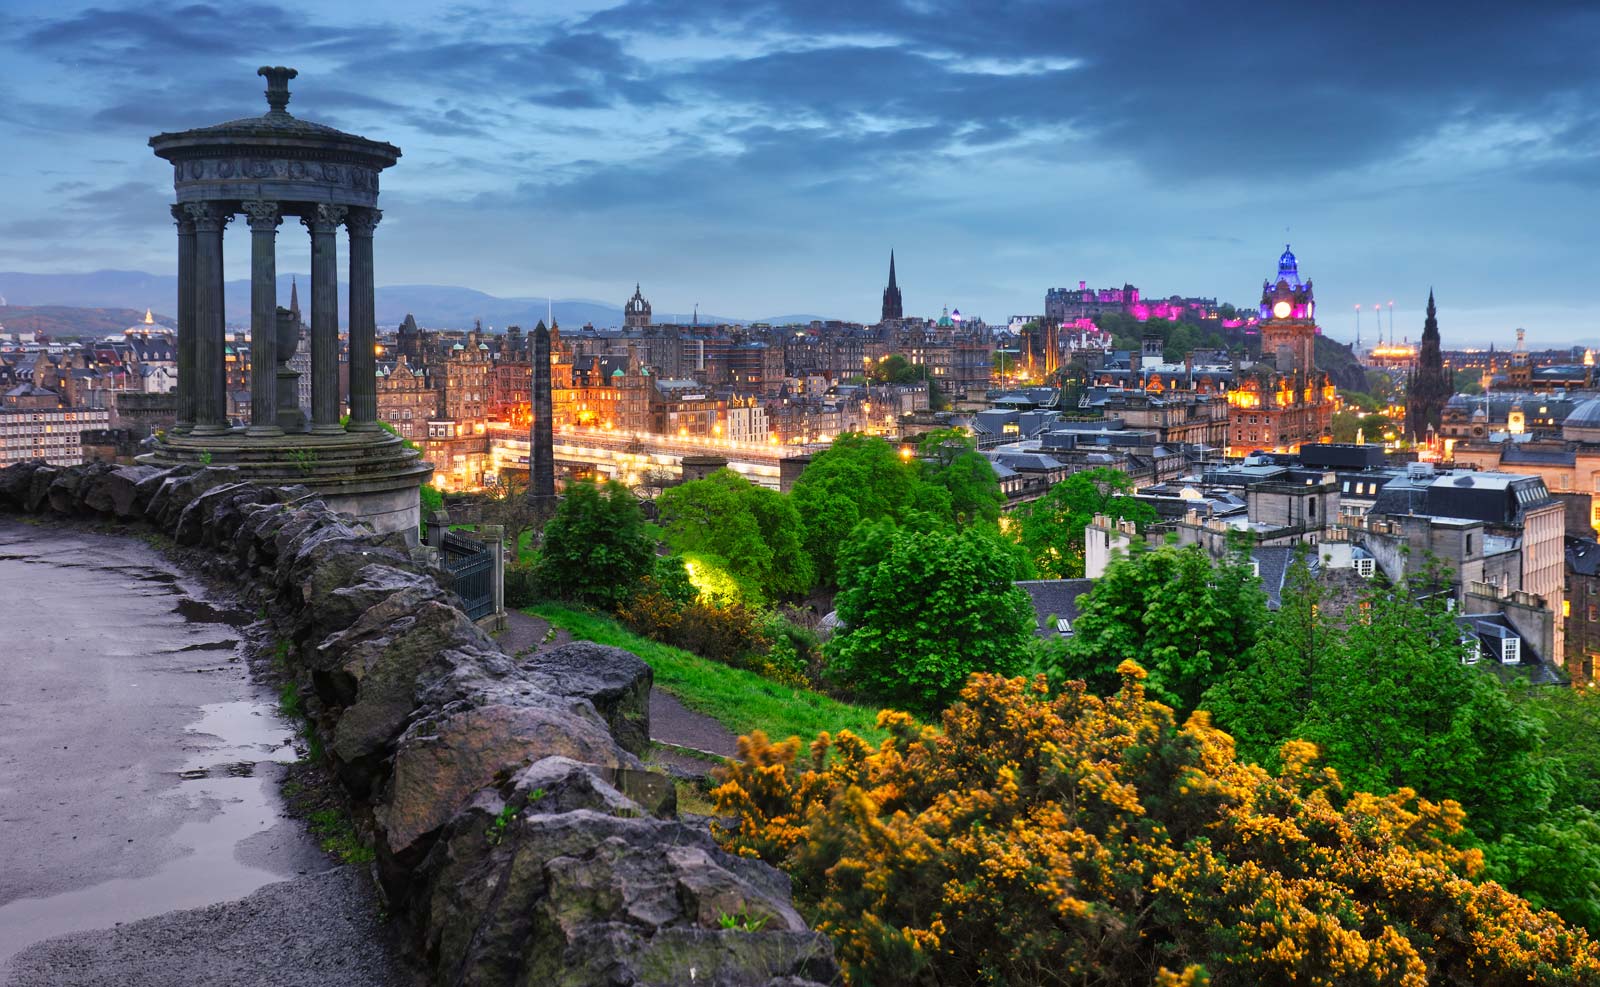 where to stay in Edinburgh recommendations